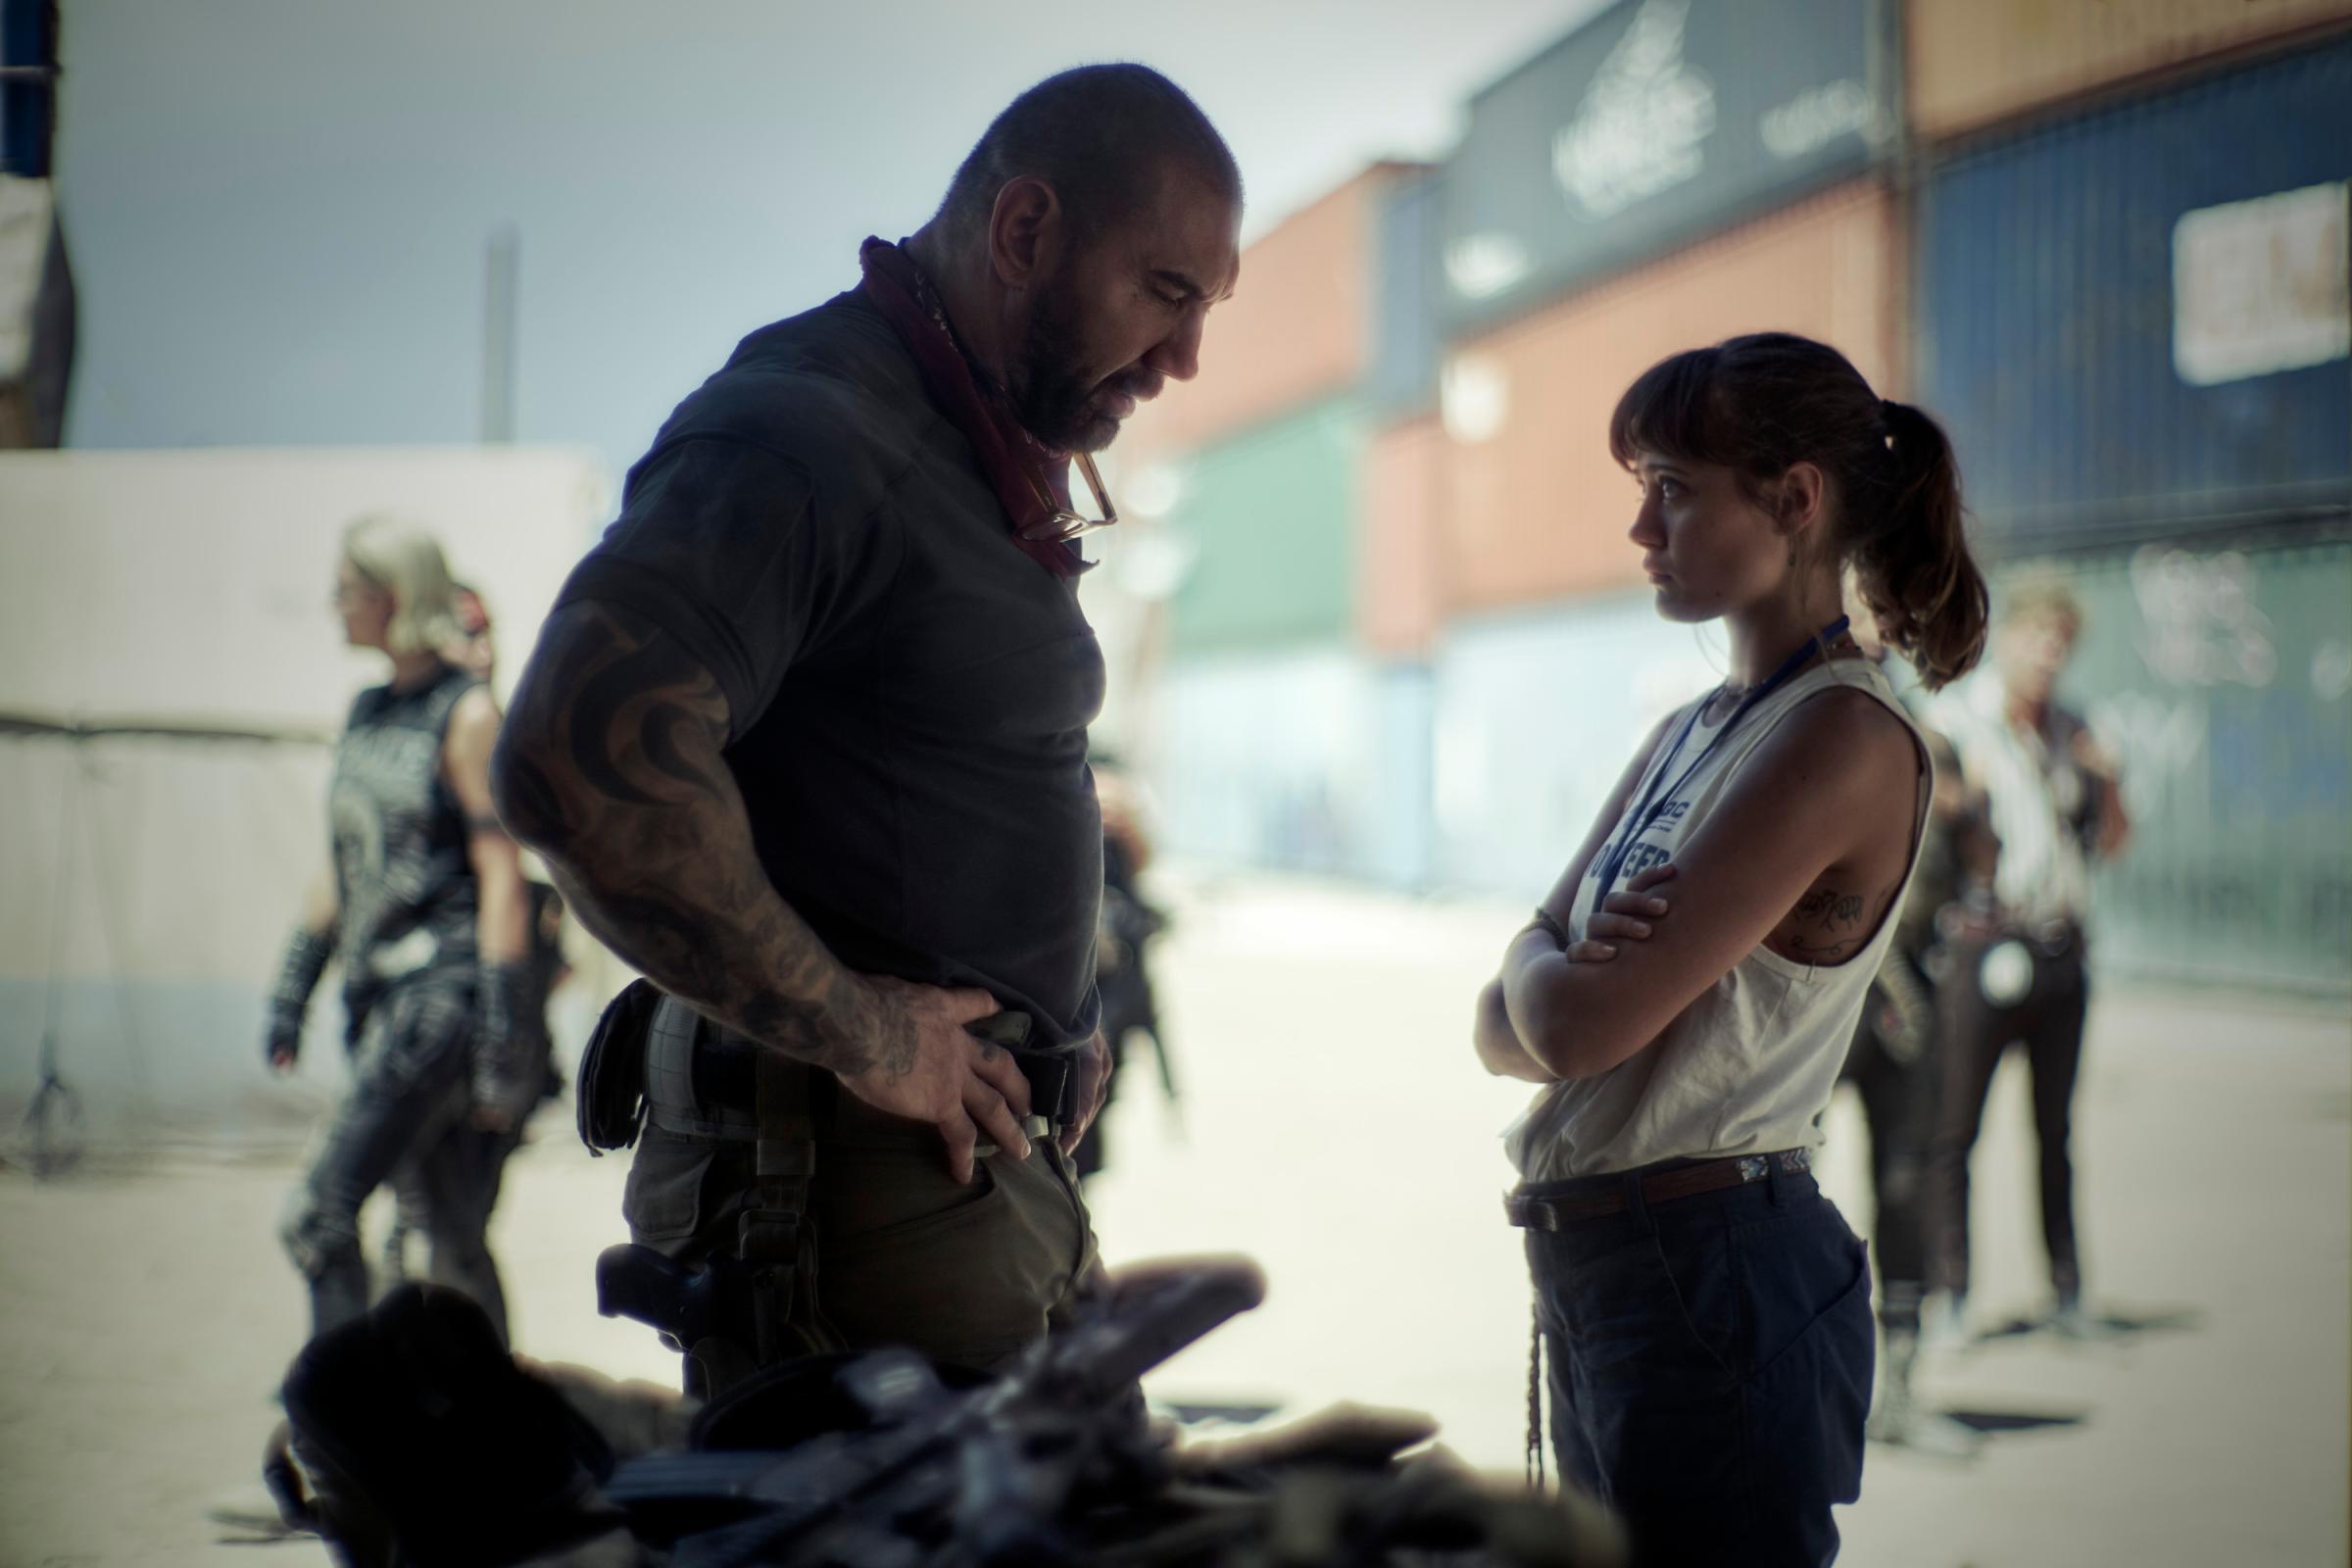 ARMY OF THE DEAD (L to R) DAVE BAUTISTA as SCOTT WARD, ELLA PURNELL as KATE WARD in ARMY OF THE DEAD. Cr. CLAY ENOS/NETFLIX © 2021